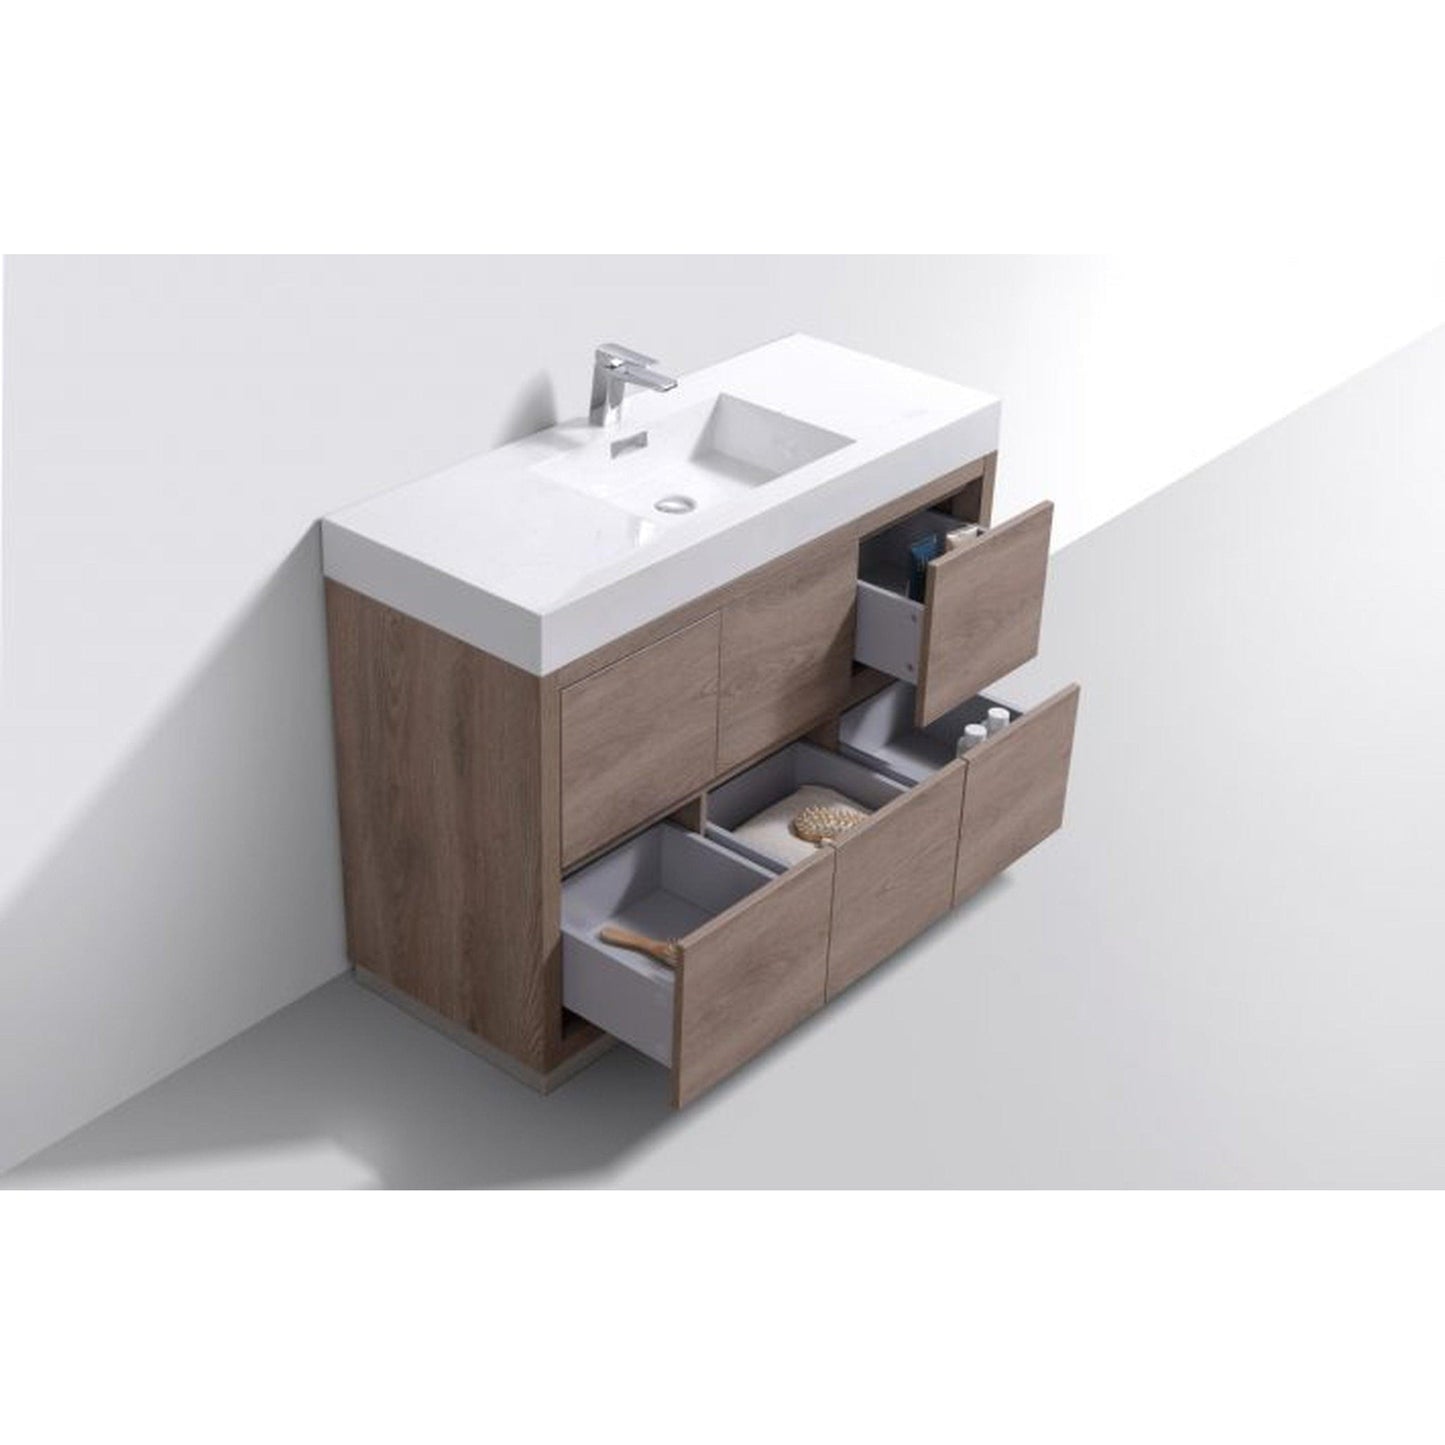 KubeBath Bliss 48" Butternut Freestanding Modern Bathroom Vanity With Single Integrated Acrylic Sink With Overflow and 48" Butternut Framed Mirror With Shelf